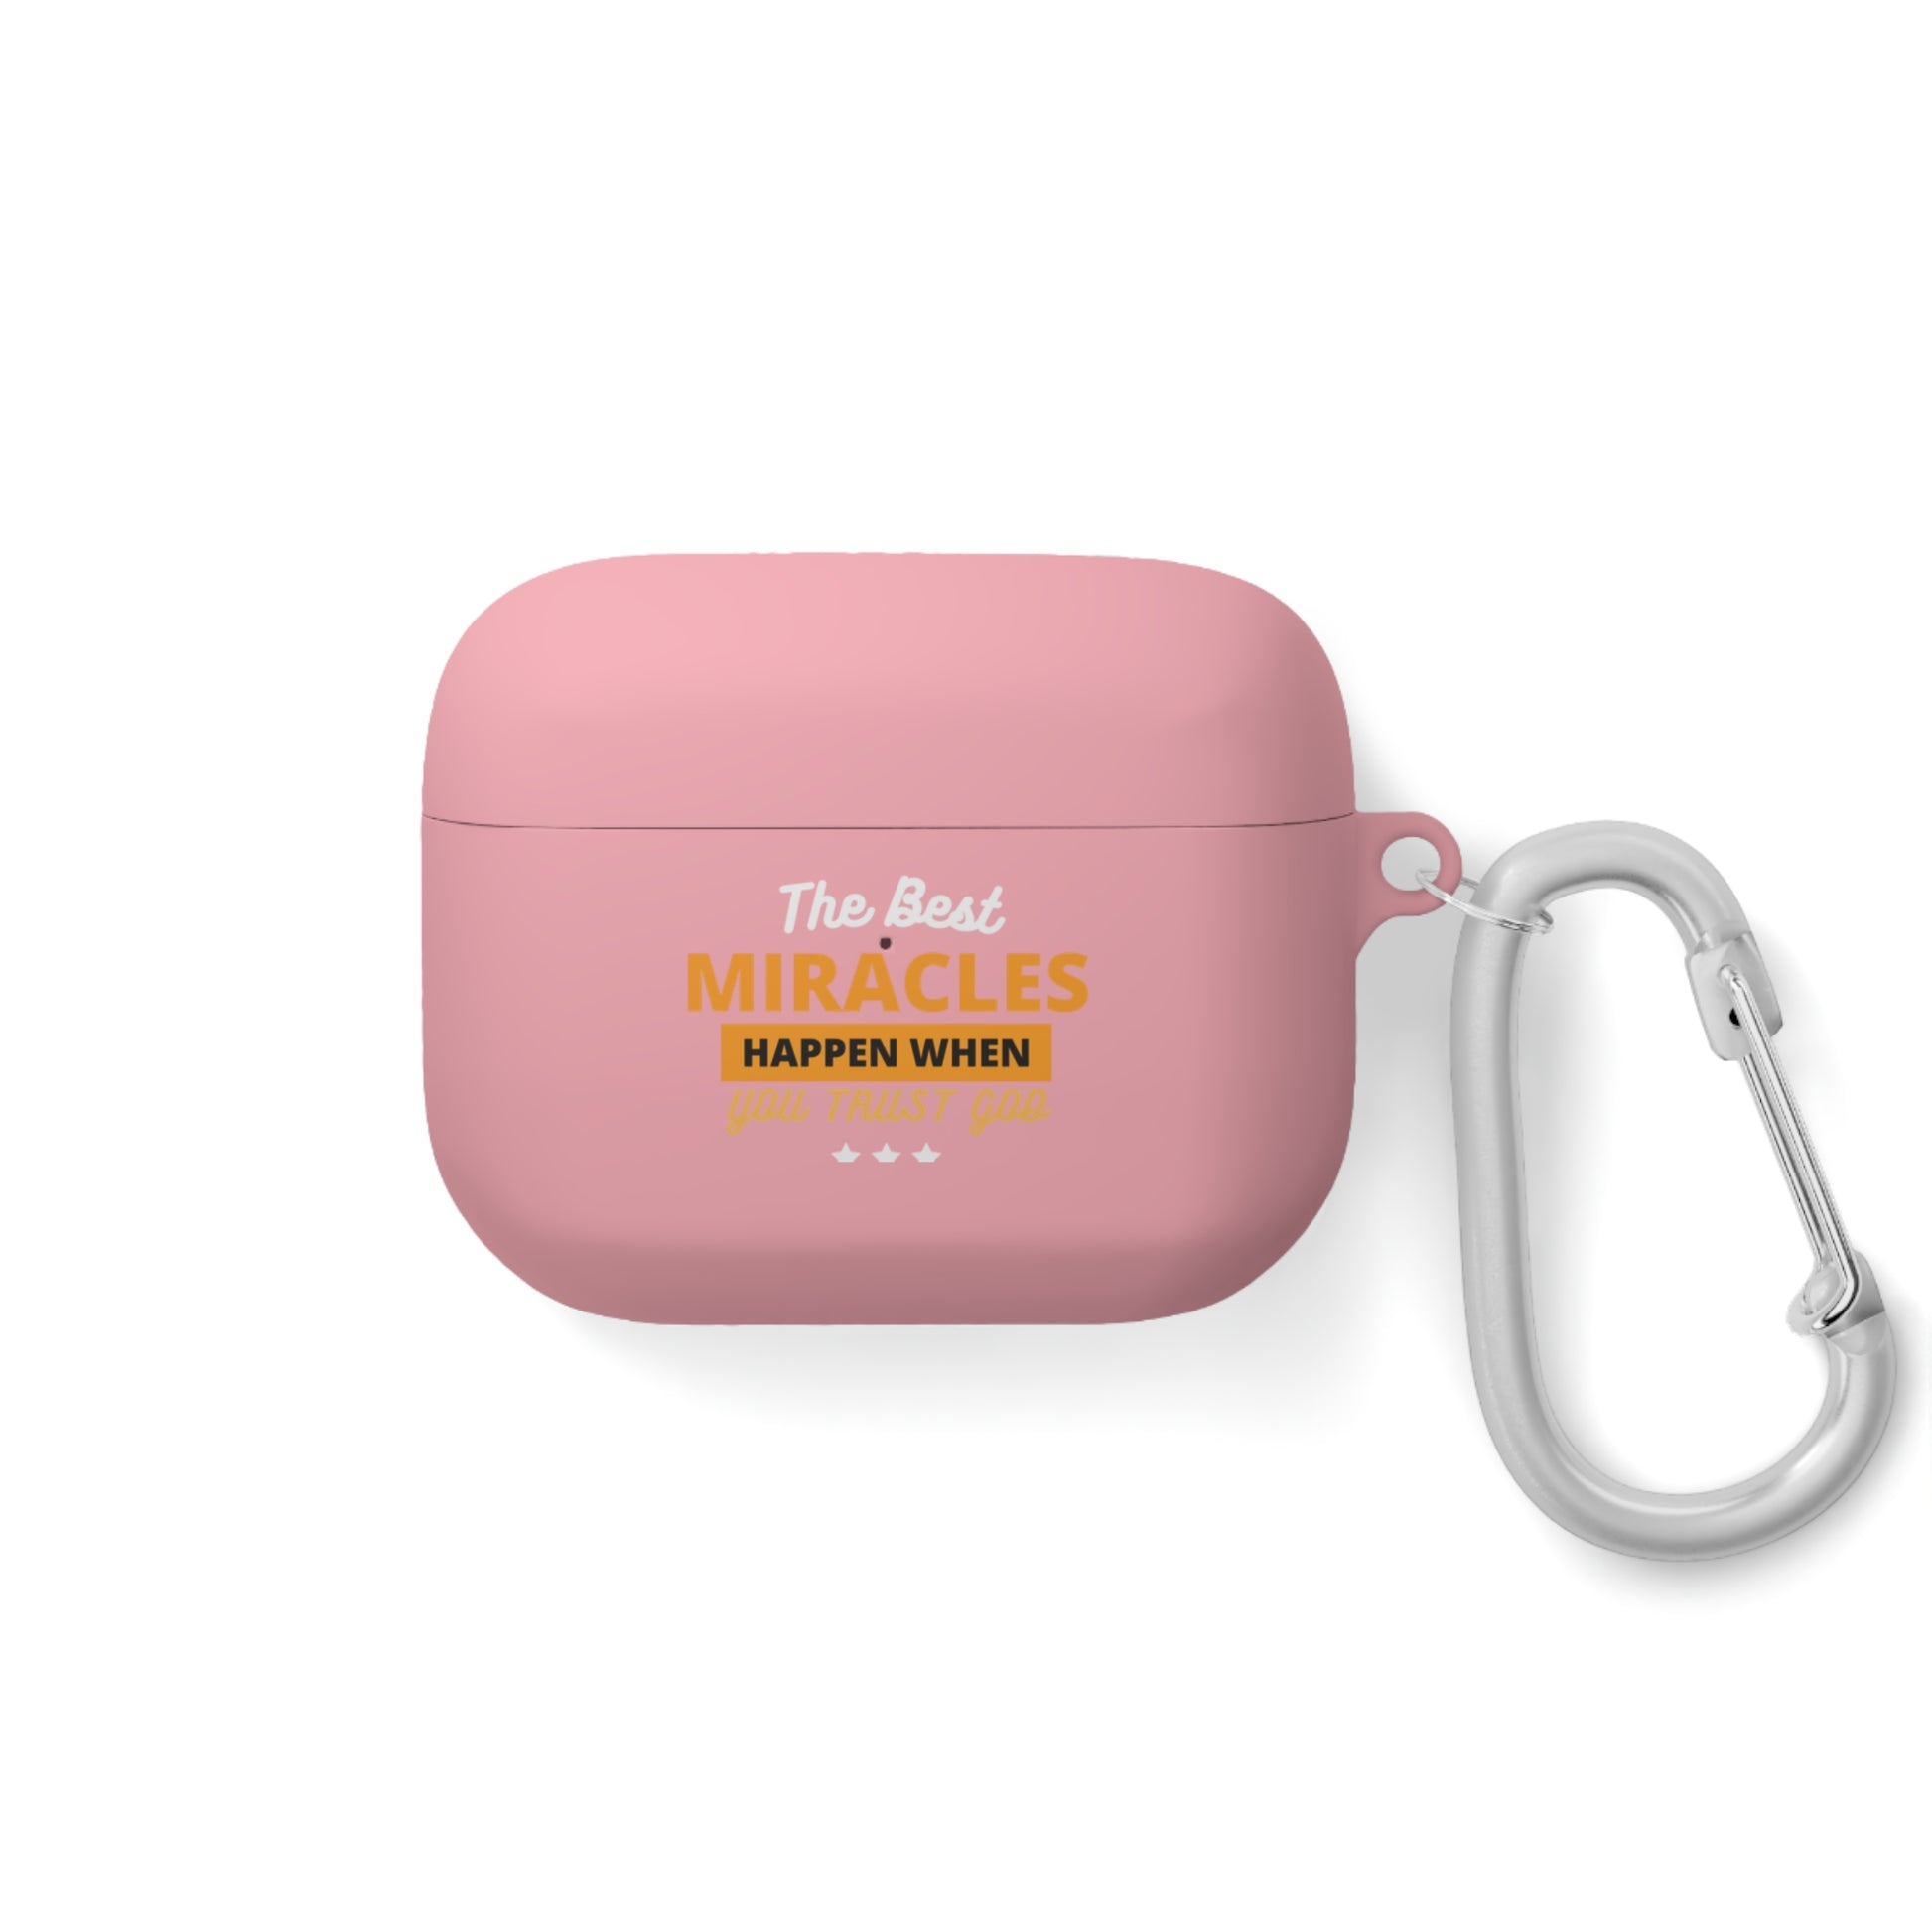 The Best Miracles Happen When You Trust God Christian Airpod / Airpods Pro Case cover Printify